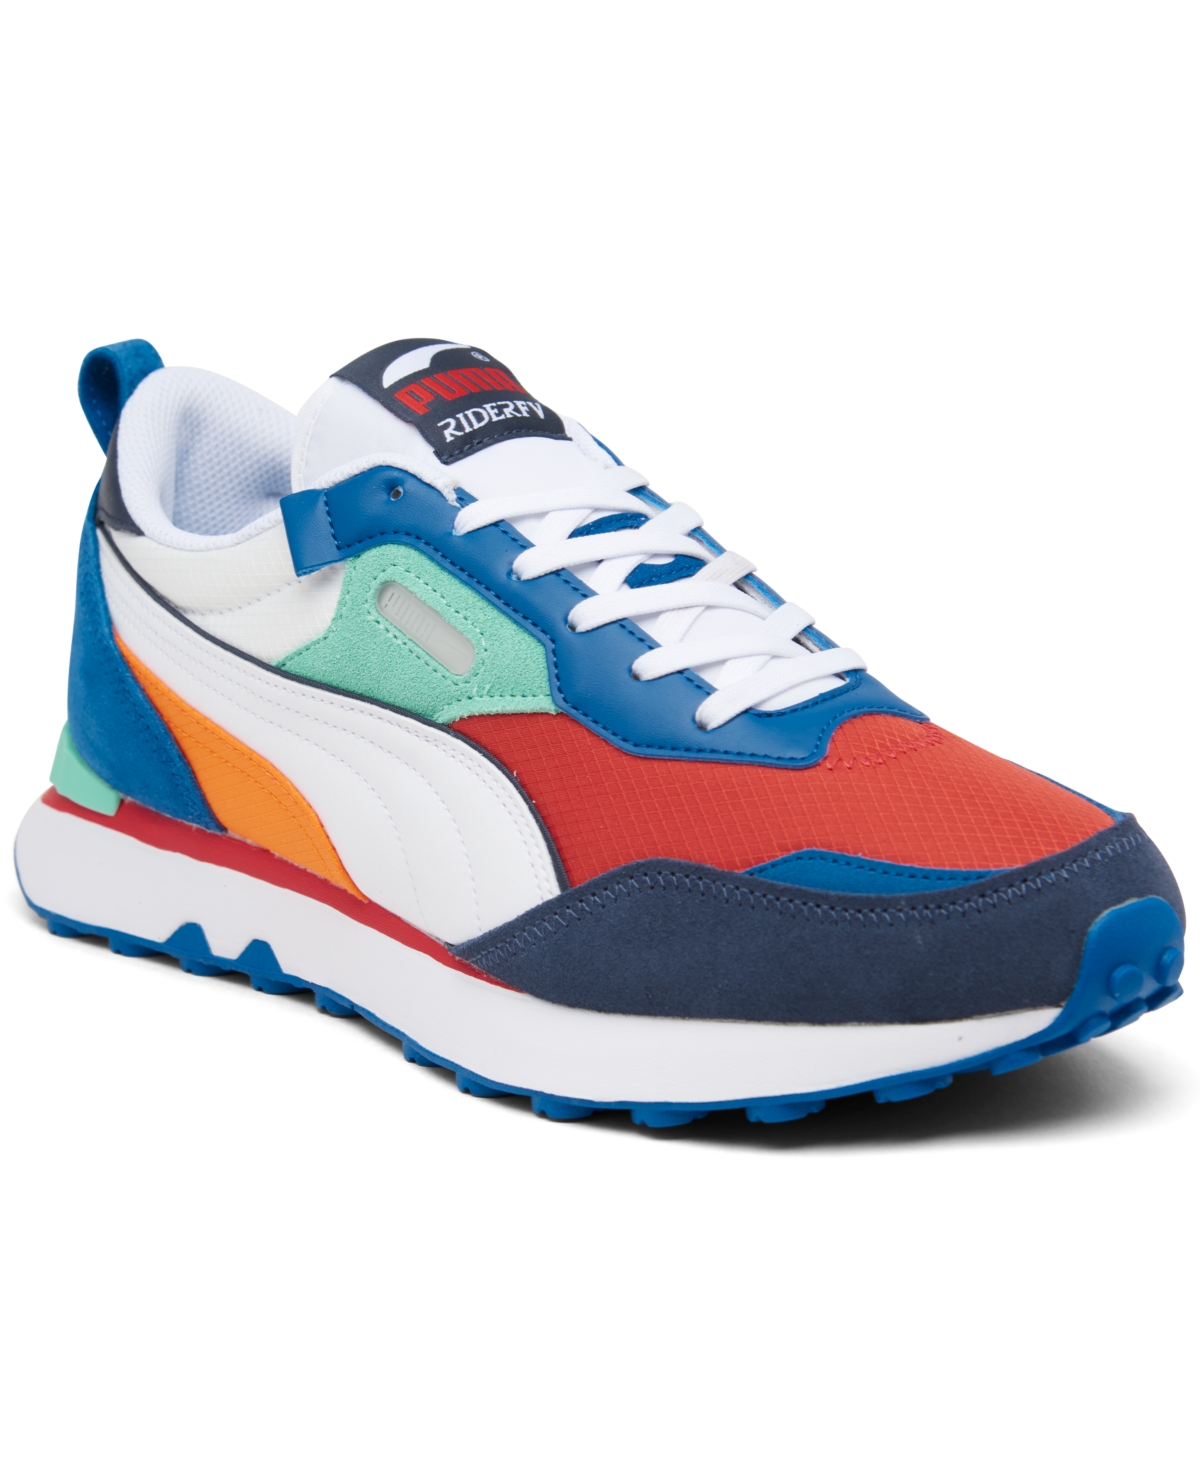 Puma Men S Rider Future Vintage Like Casual Sneakers From Finish Line In White Red Blue Mint Modesens